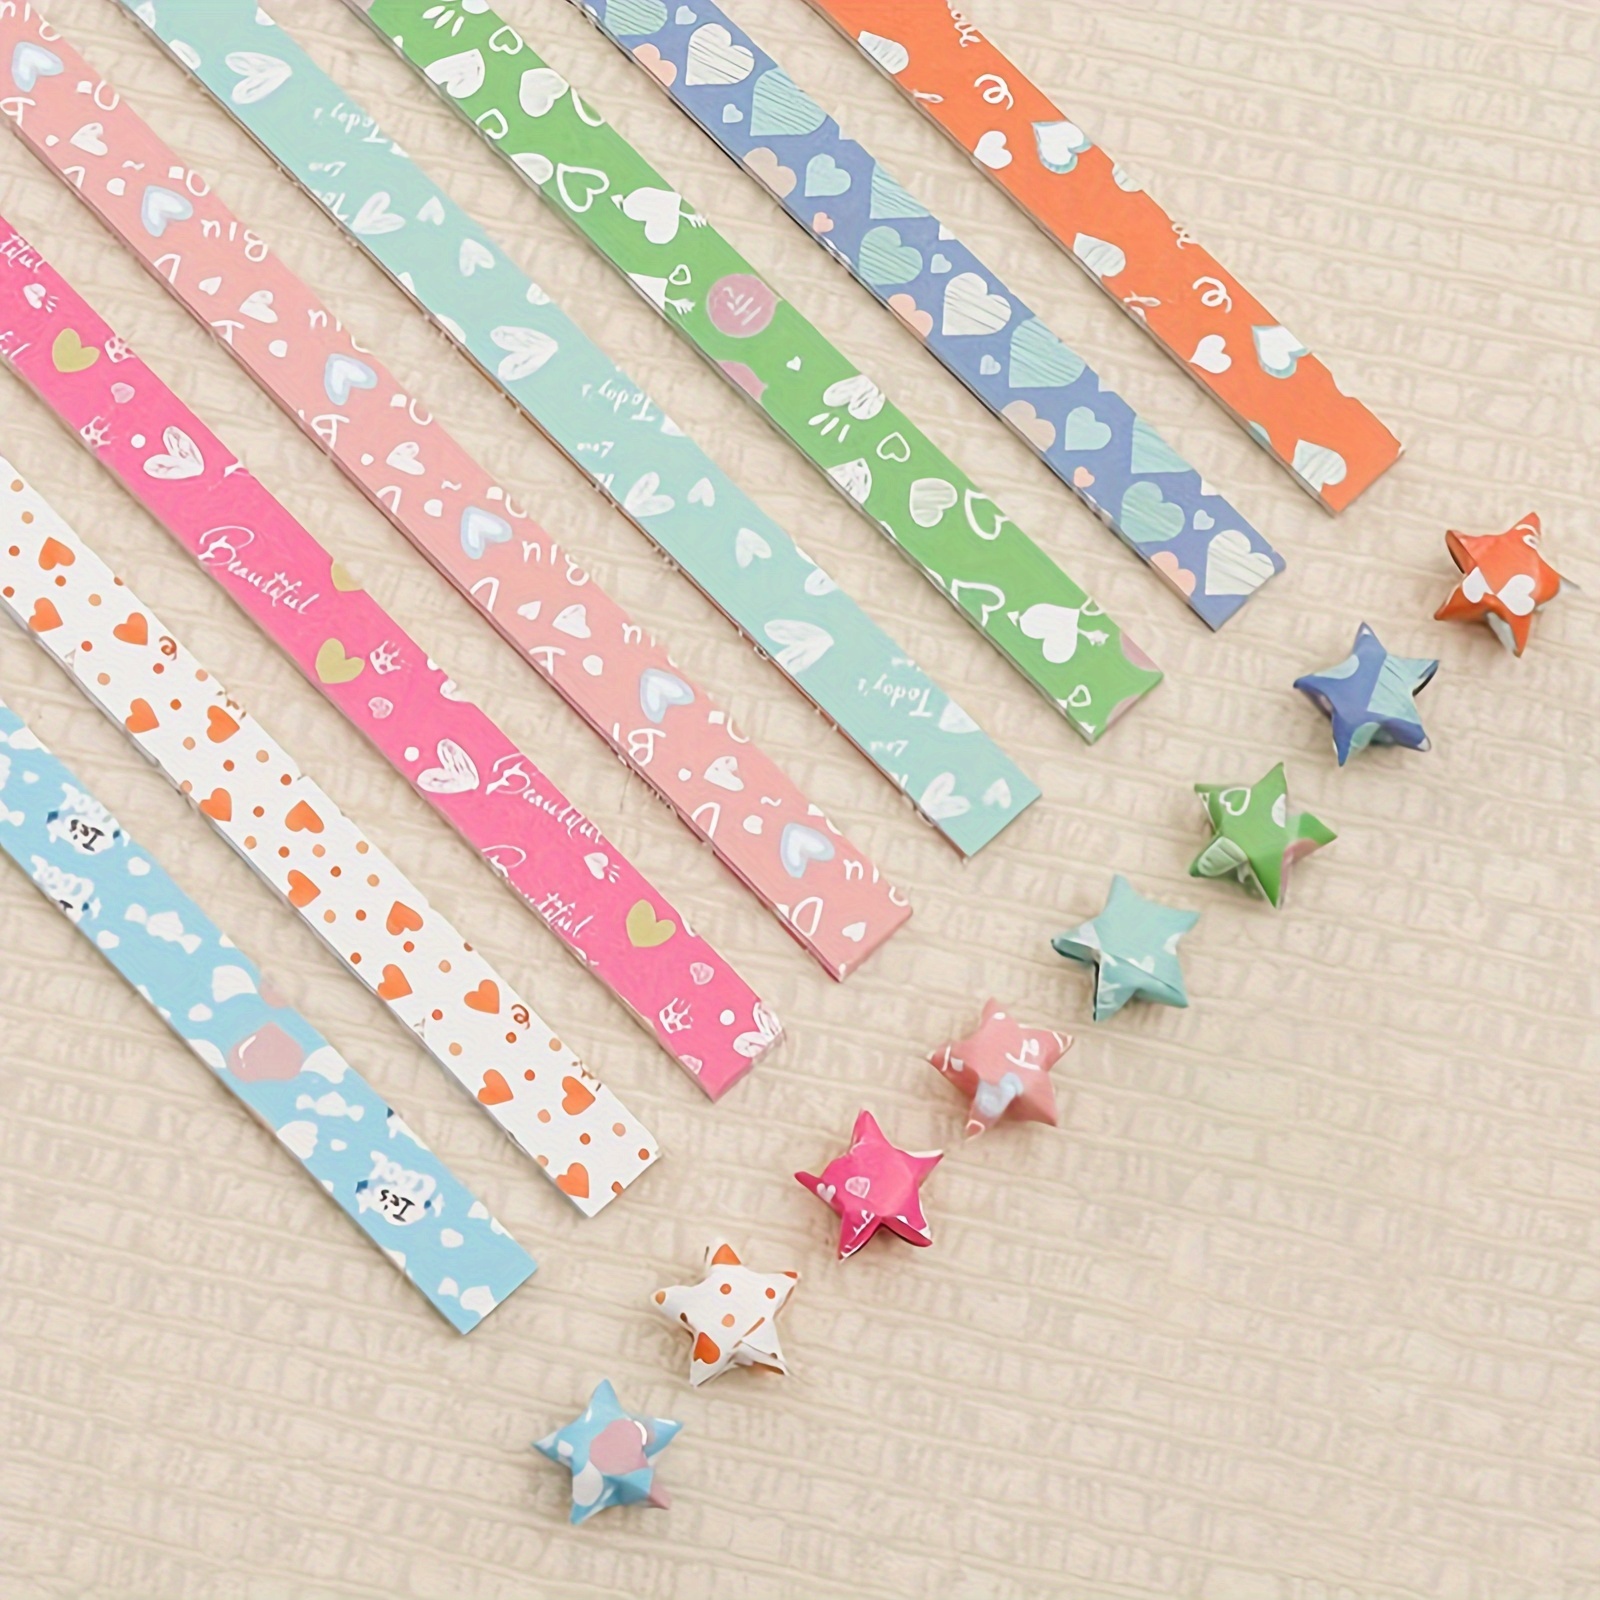 540 Sheets New Cartoon Paper With Printed Pattern Set Outer Space Sky  Origami Lucky Star Folding